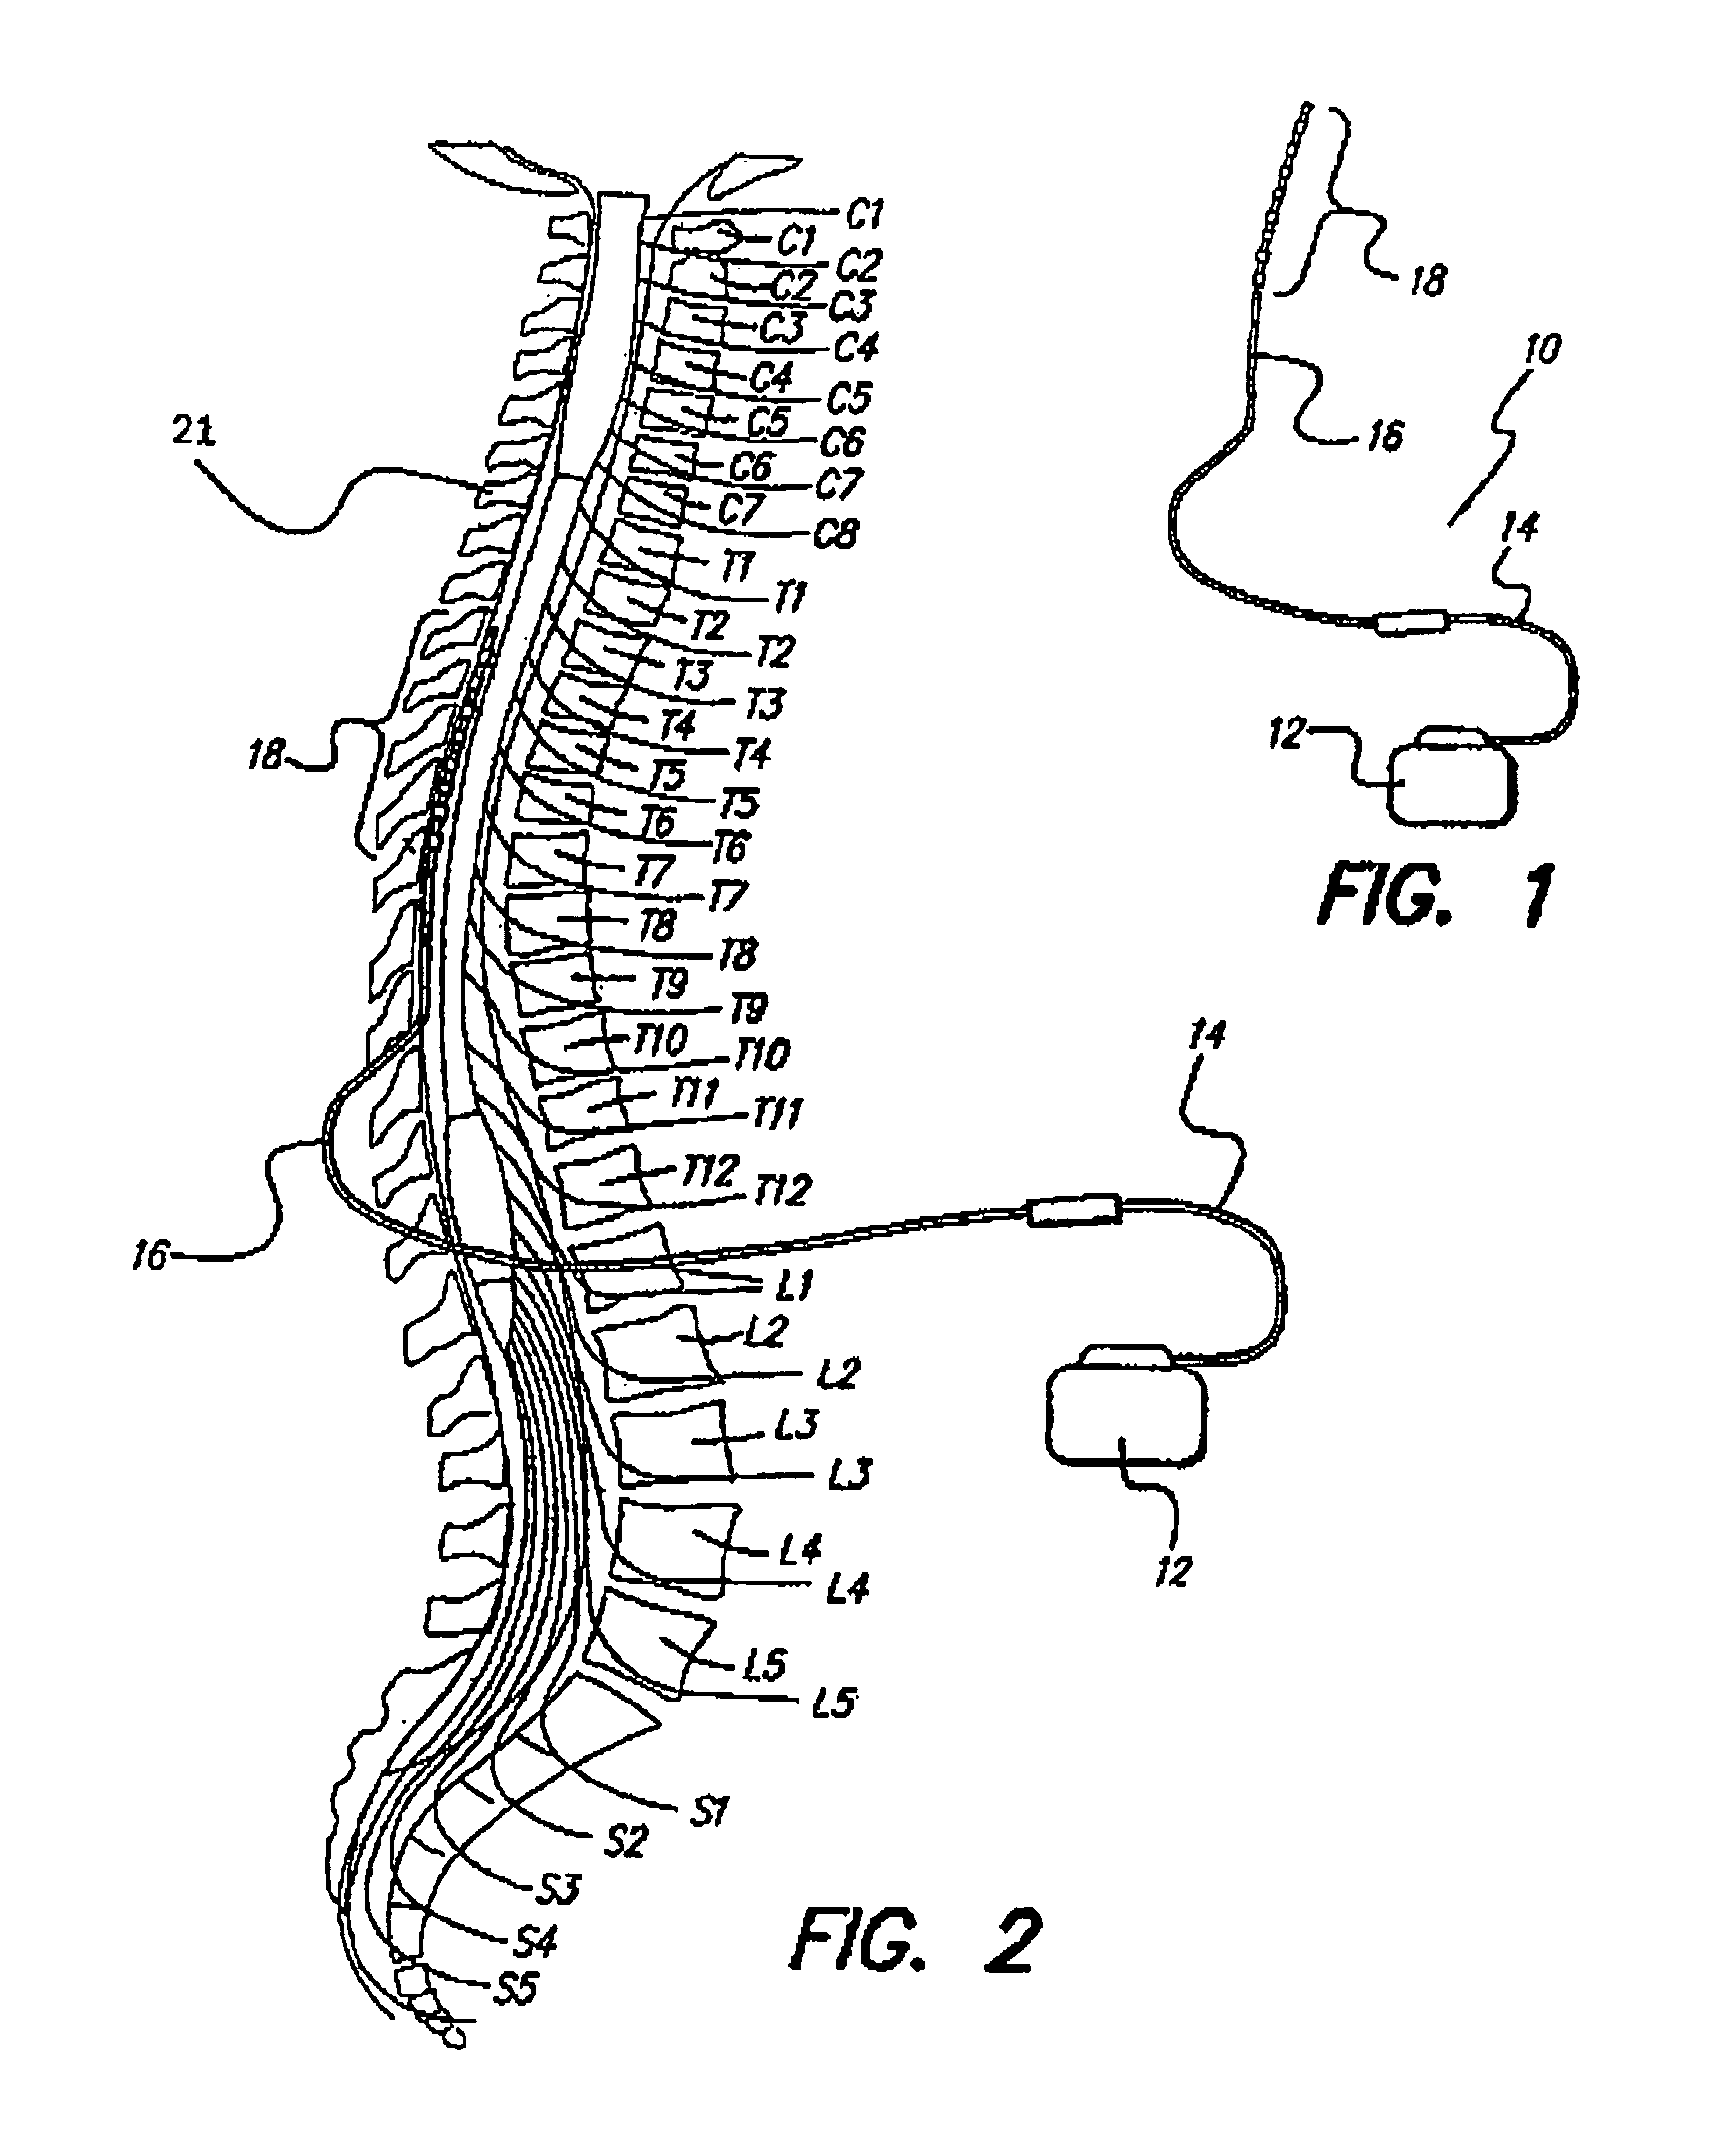 System and method of rapid, comfortable parameter switching in spinal cord stimulation